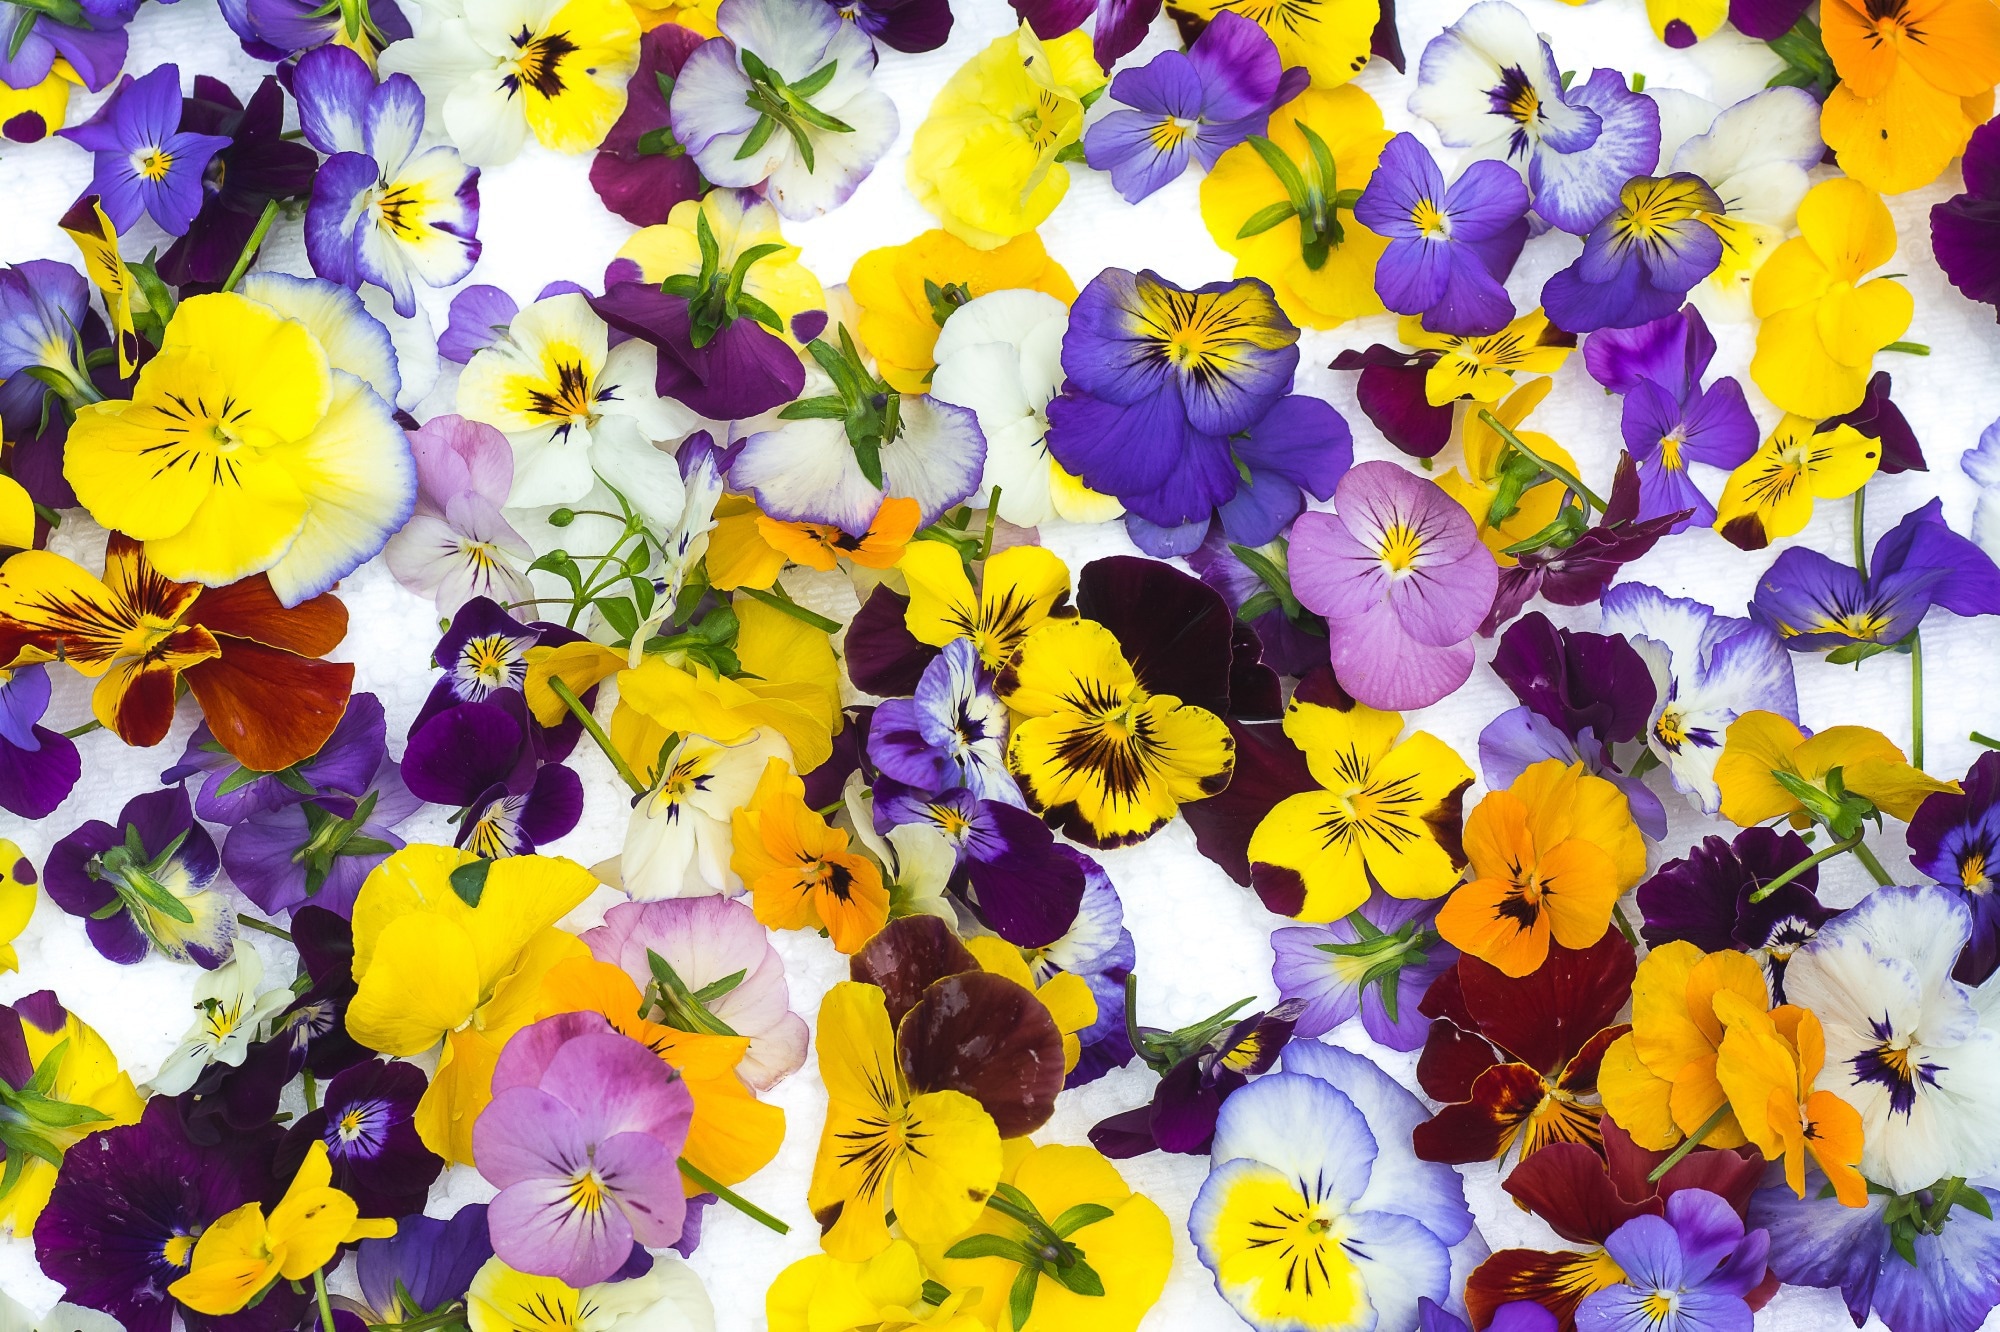 Unfolding the petal-perfect virtues of edible flowers